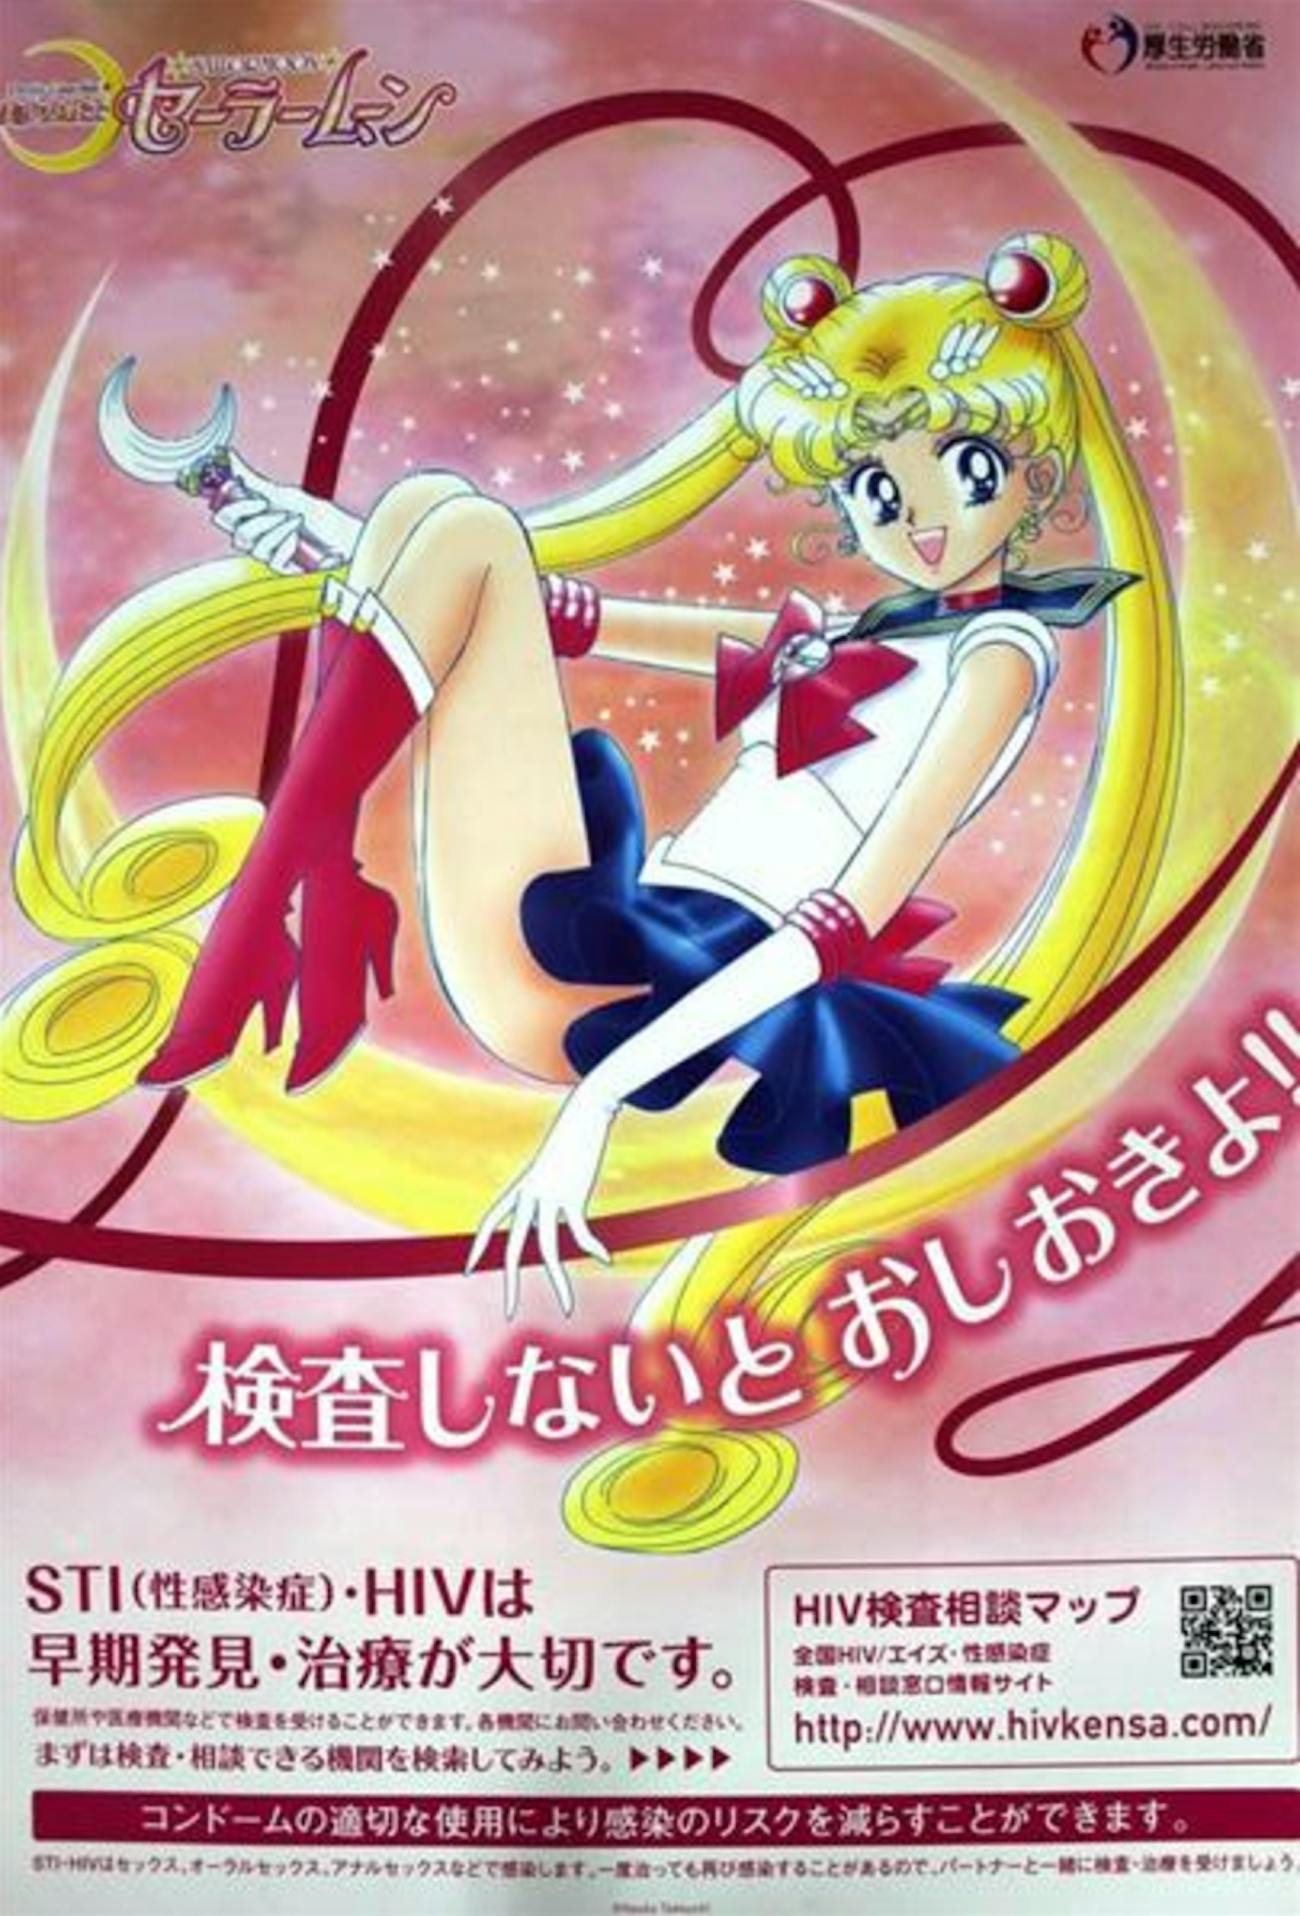 Sailor Moon Is Japan S Poster Girl For Sti Awareness Inverse